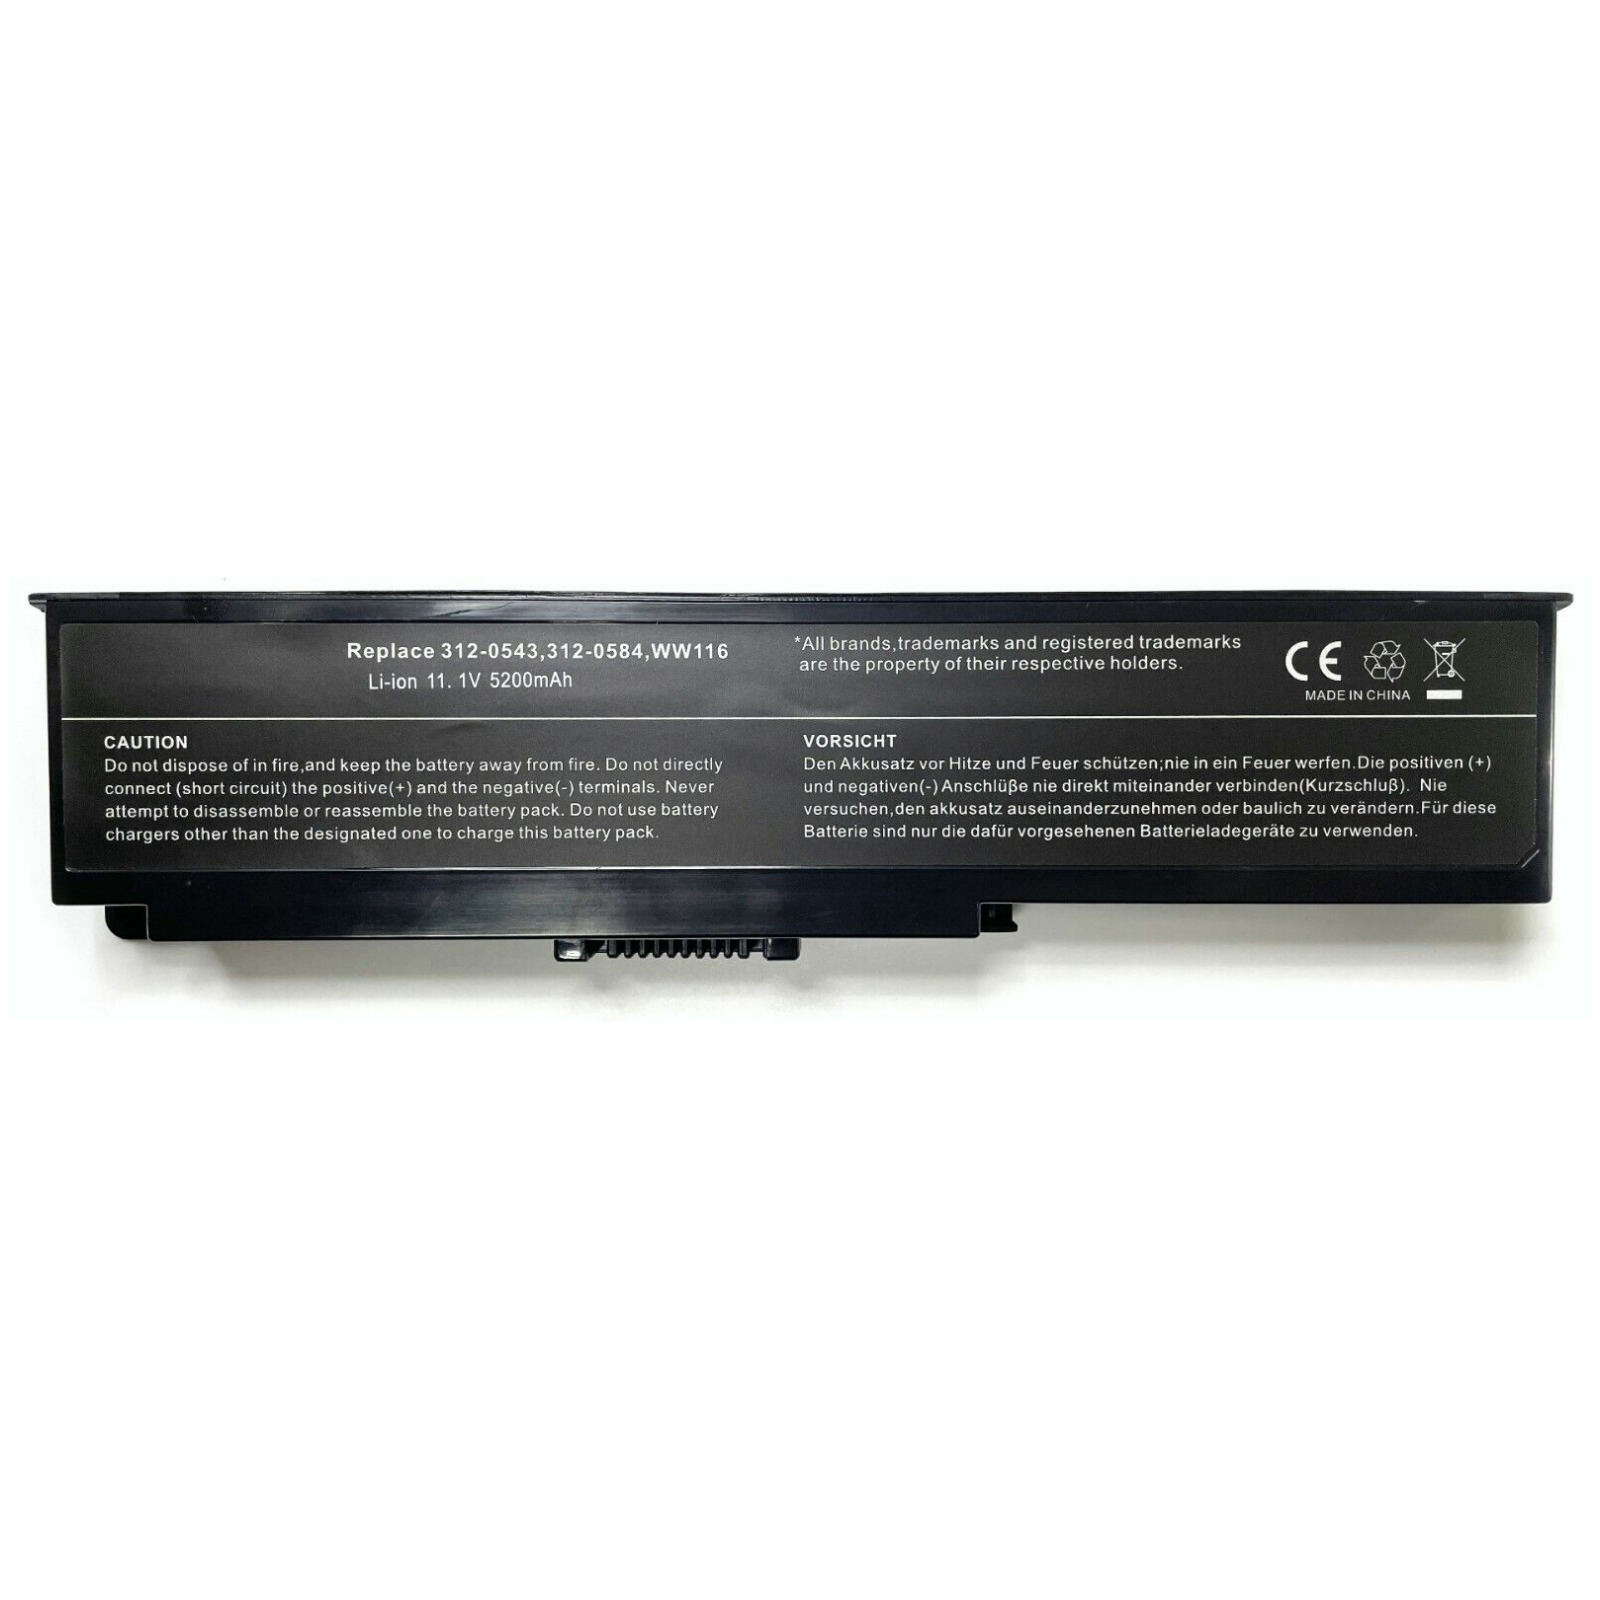 Battery for Dell Inspiron 1420 Vostro 1400 312-0543 312-0584 FT080 WW116 MN151